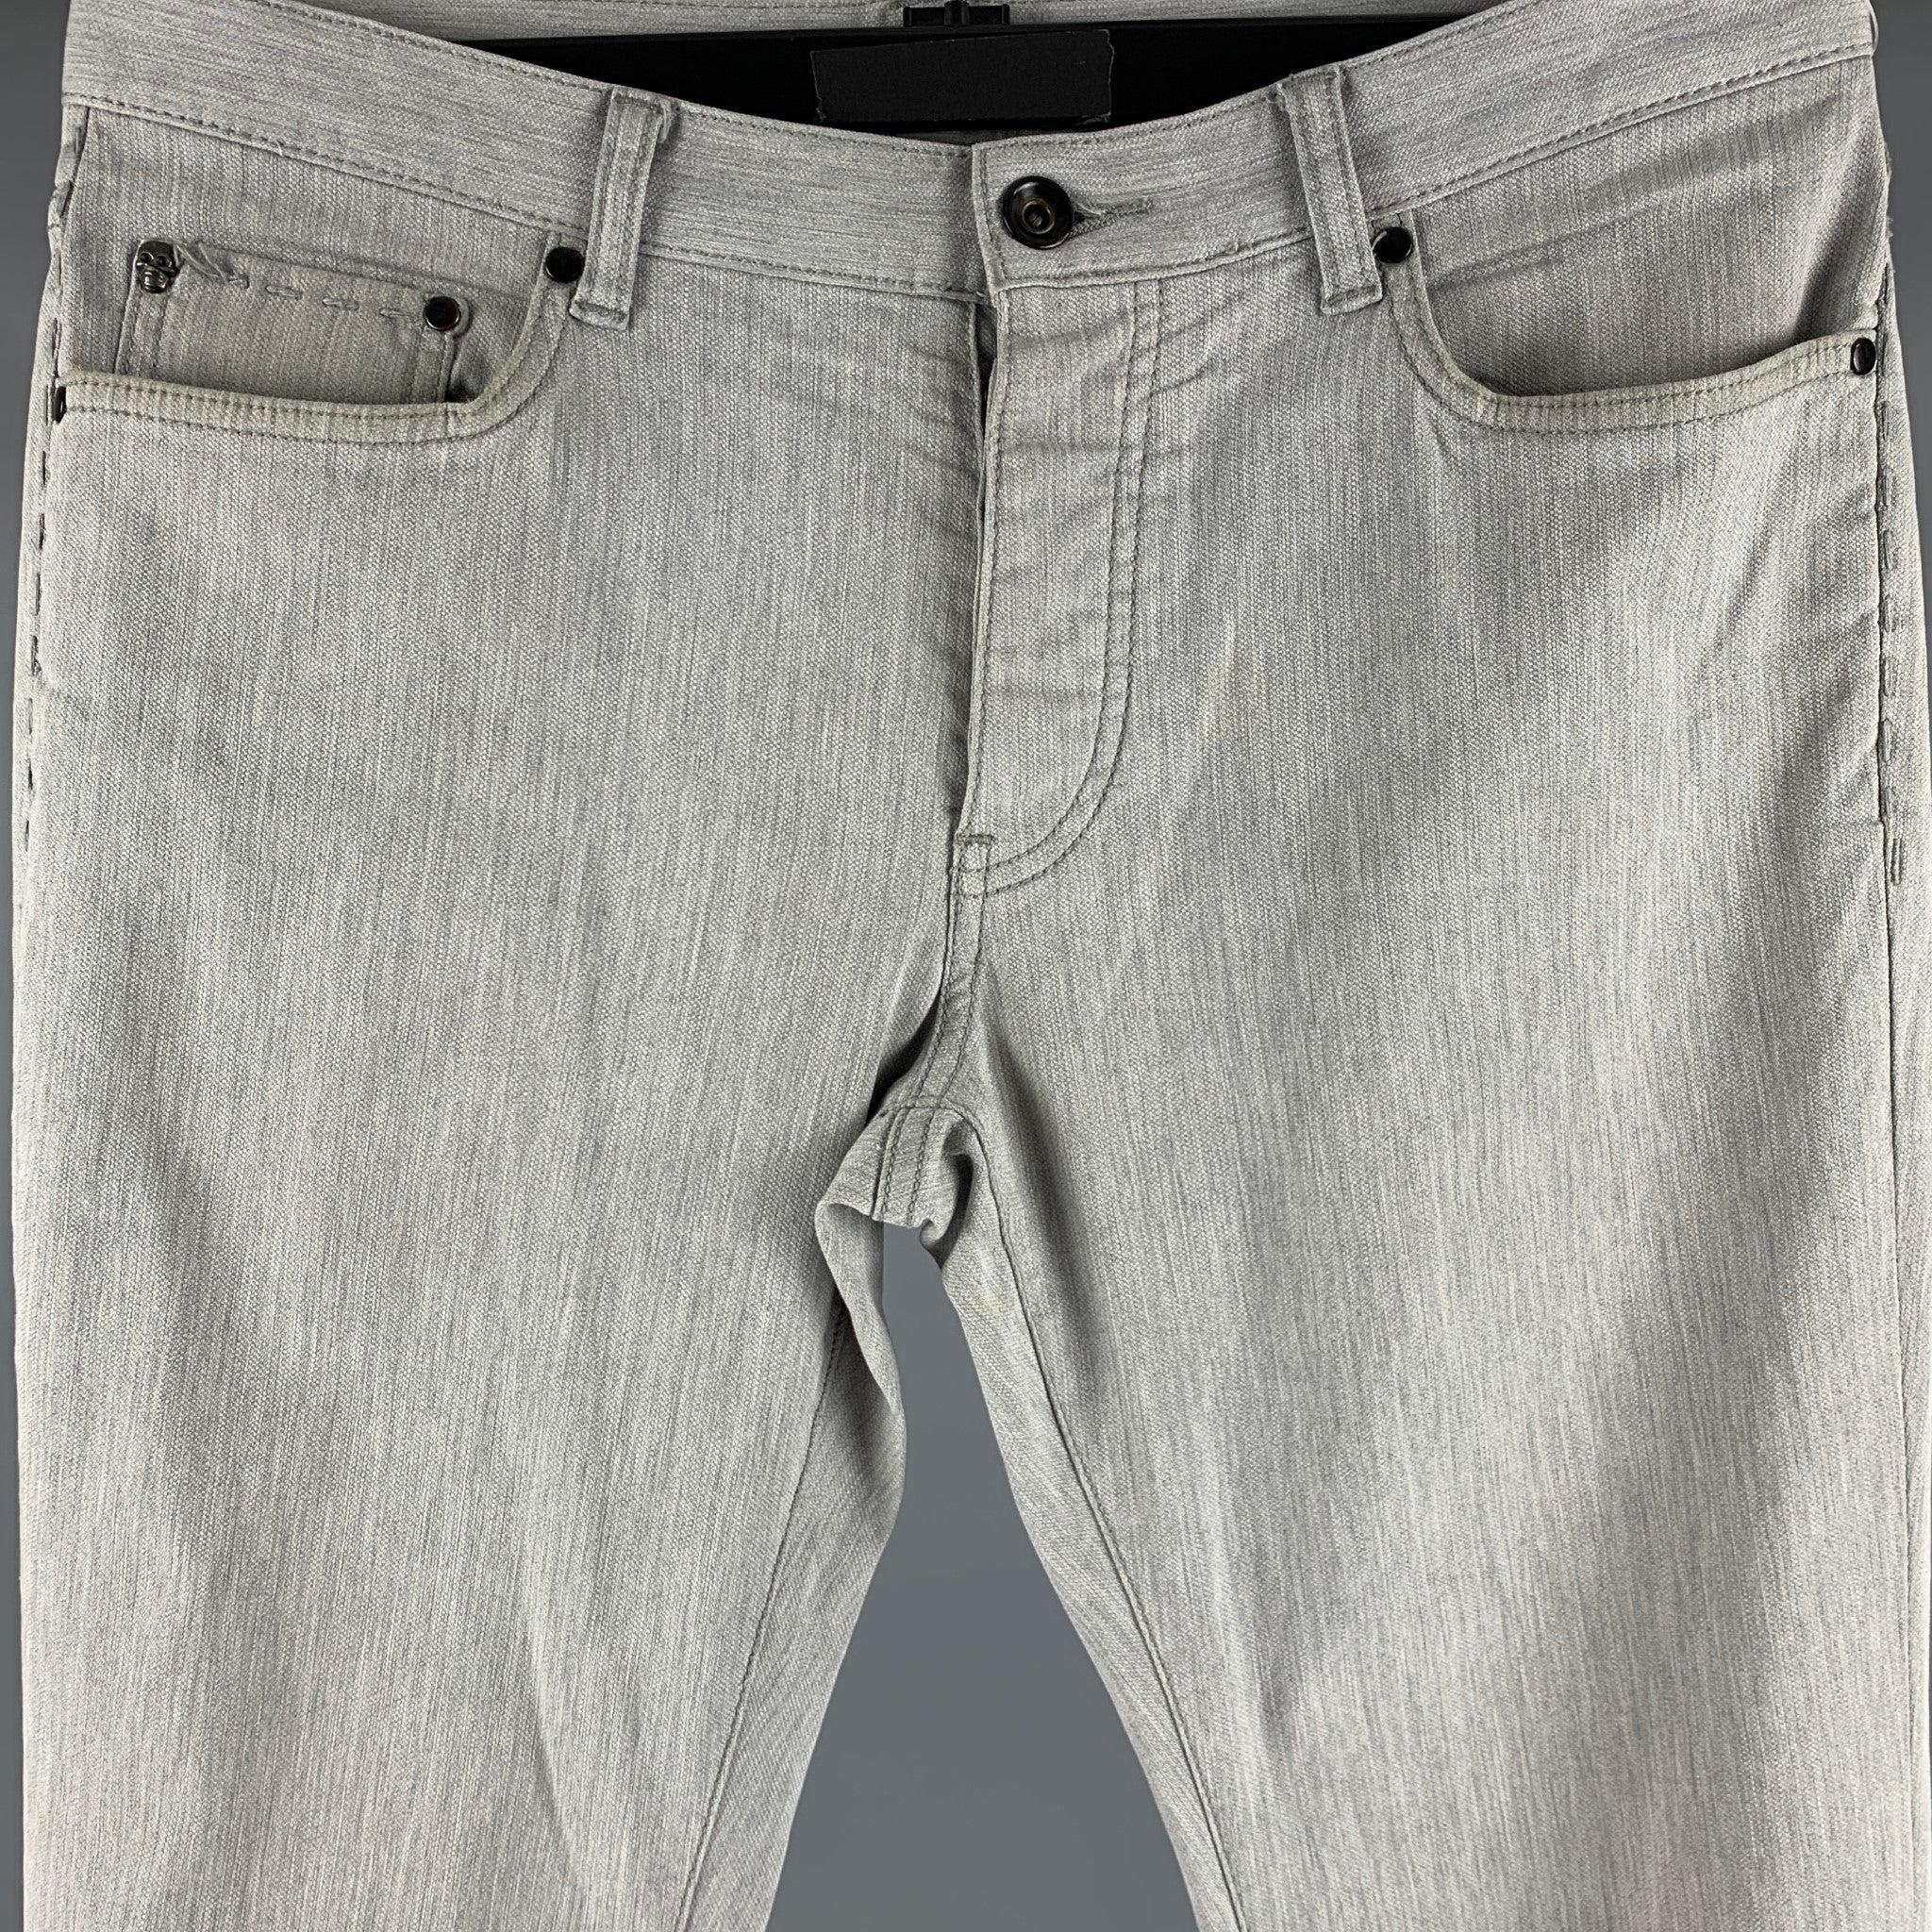 JOHN VARVATOS Size 32 Light Grey Cotton Elastane Jeans In Good Condition For Sale In San Francisco, CA